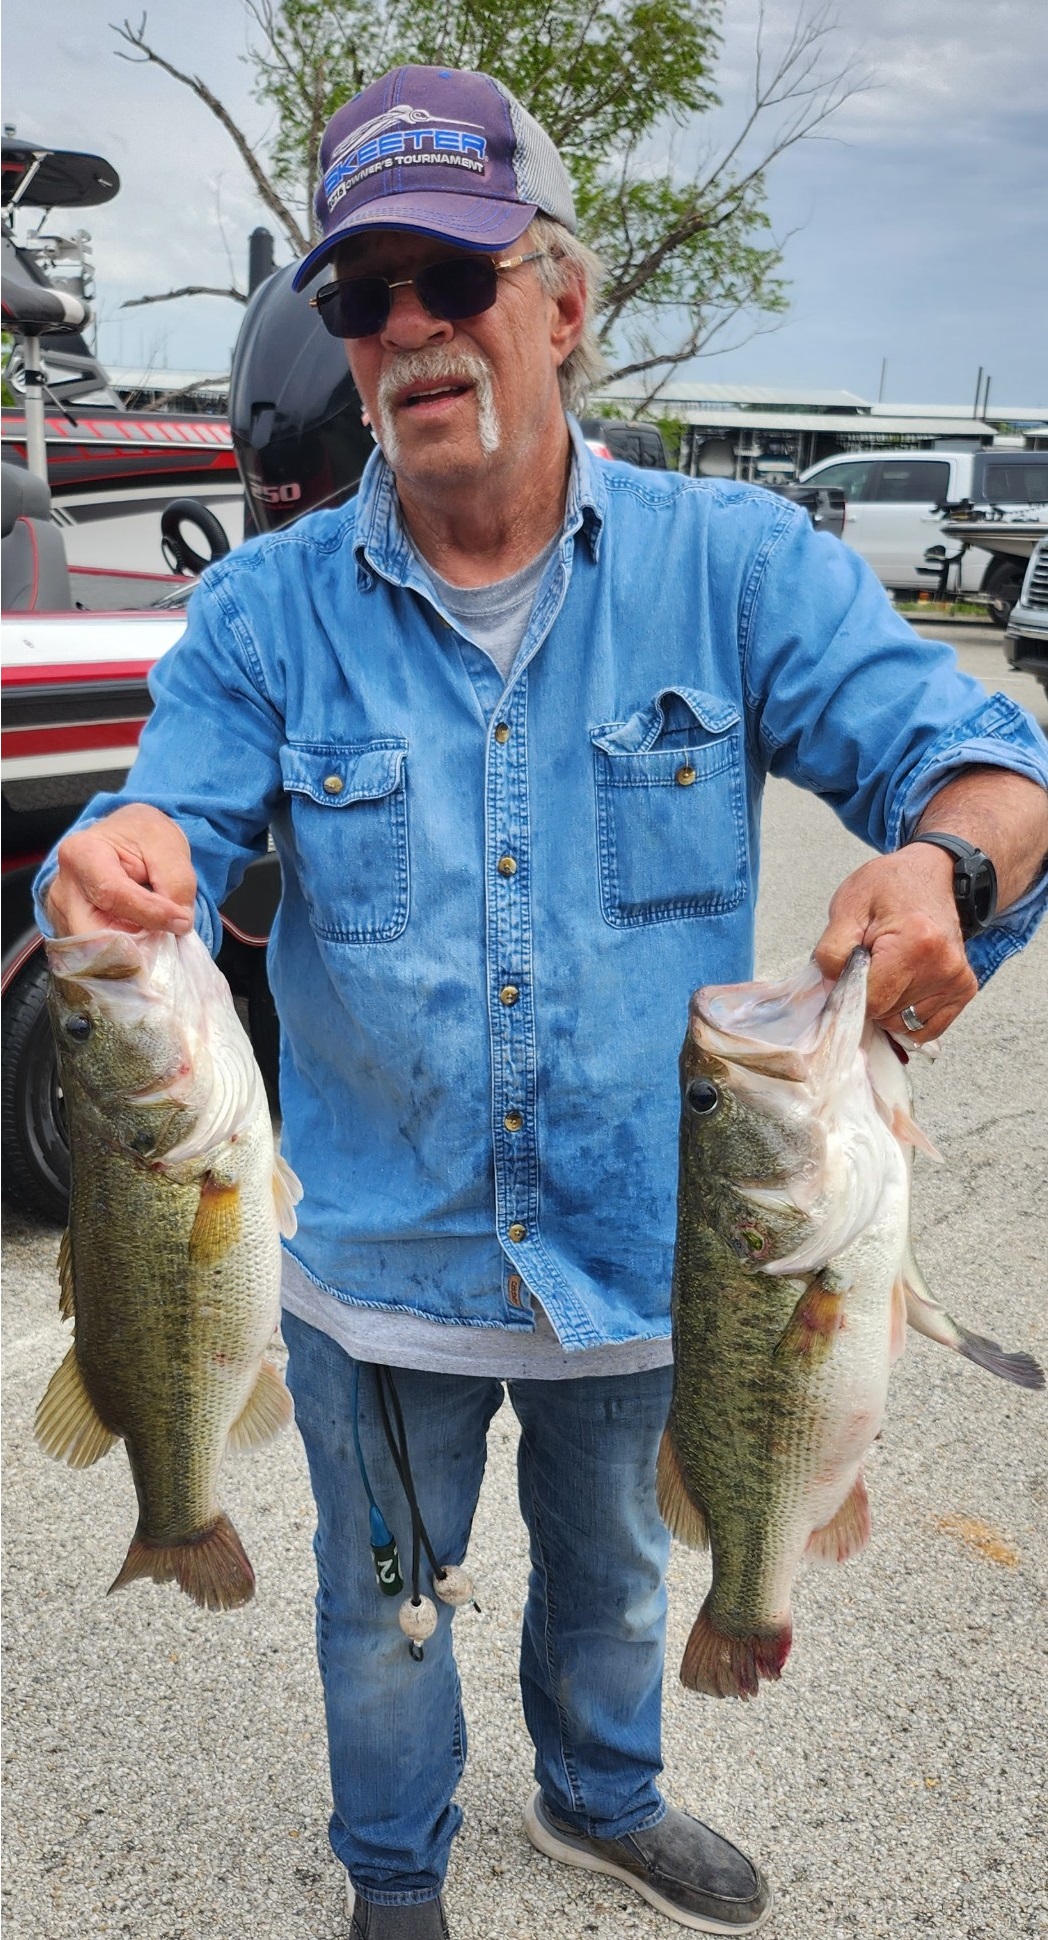 Bob Aldert with his and Jeremy's 4th place stringer of 12.64 lbs at Lake Lewisville!!